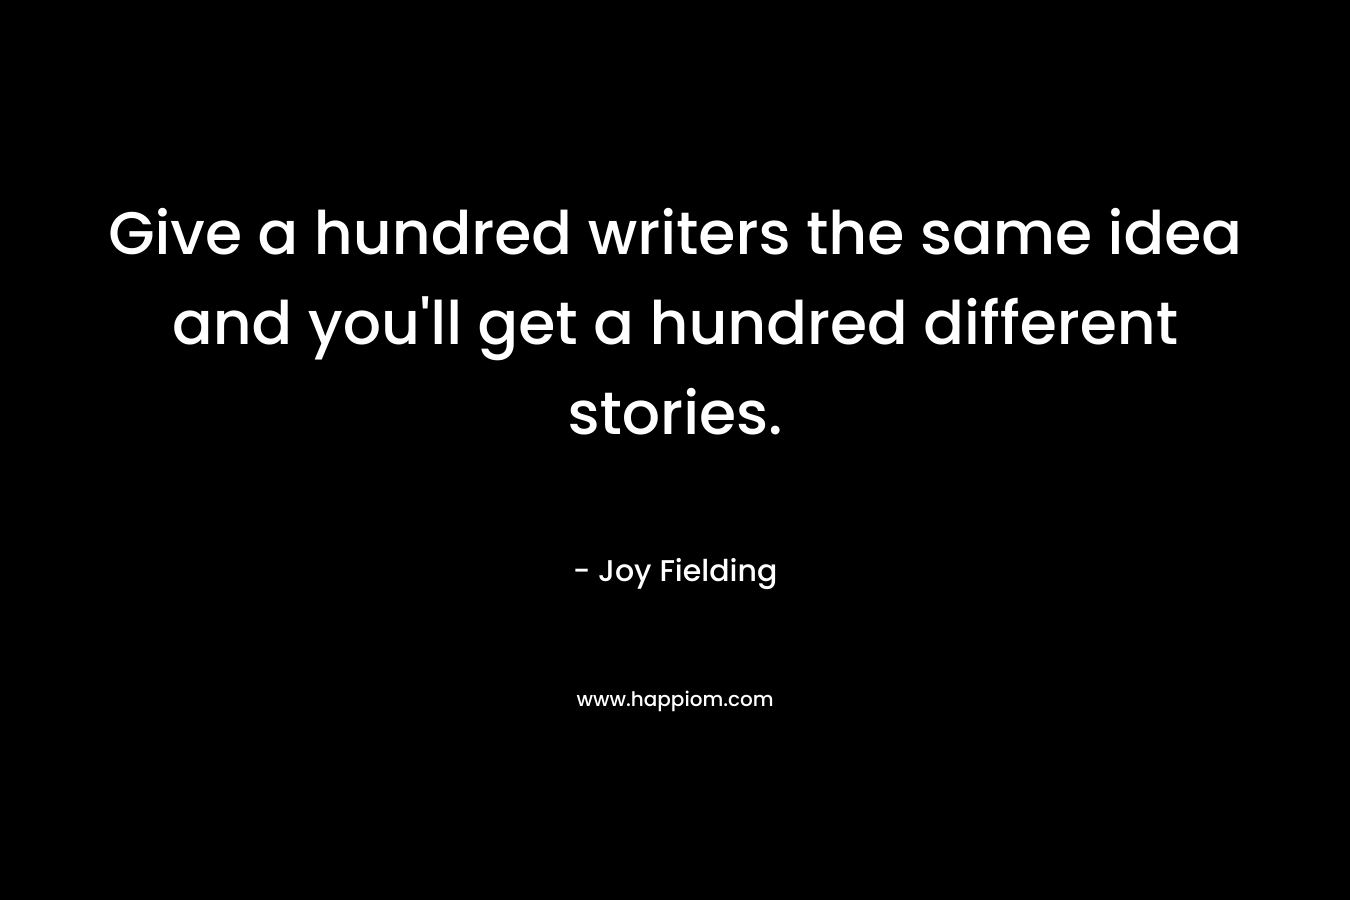 Give a hundred writers the same idea and you'll get a hundred different stories.